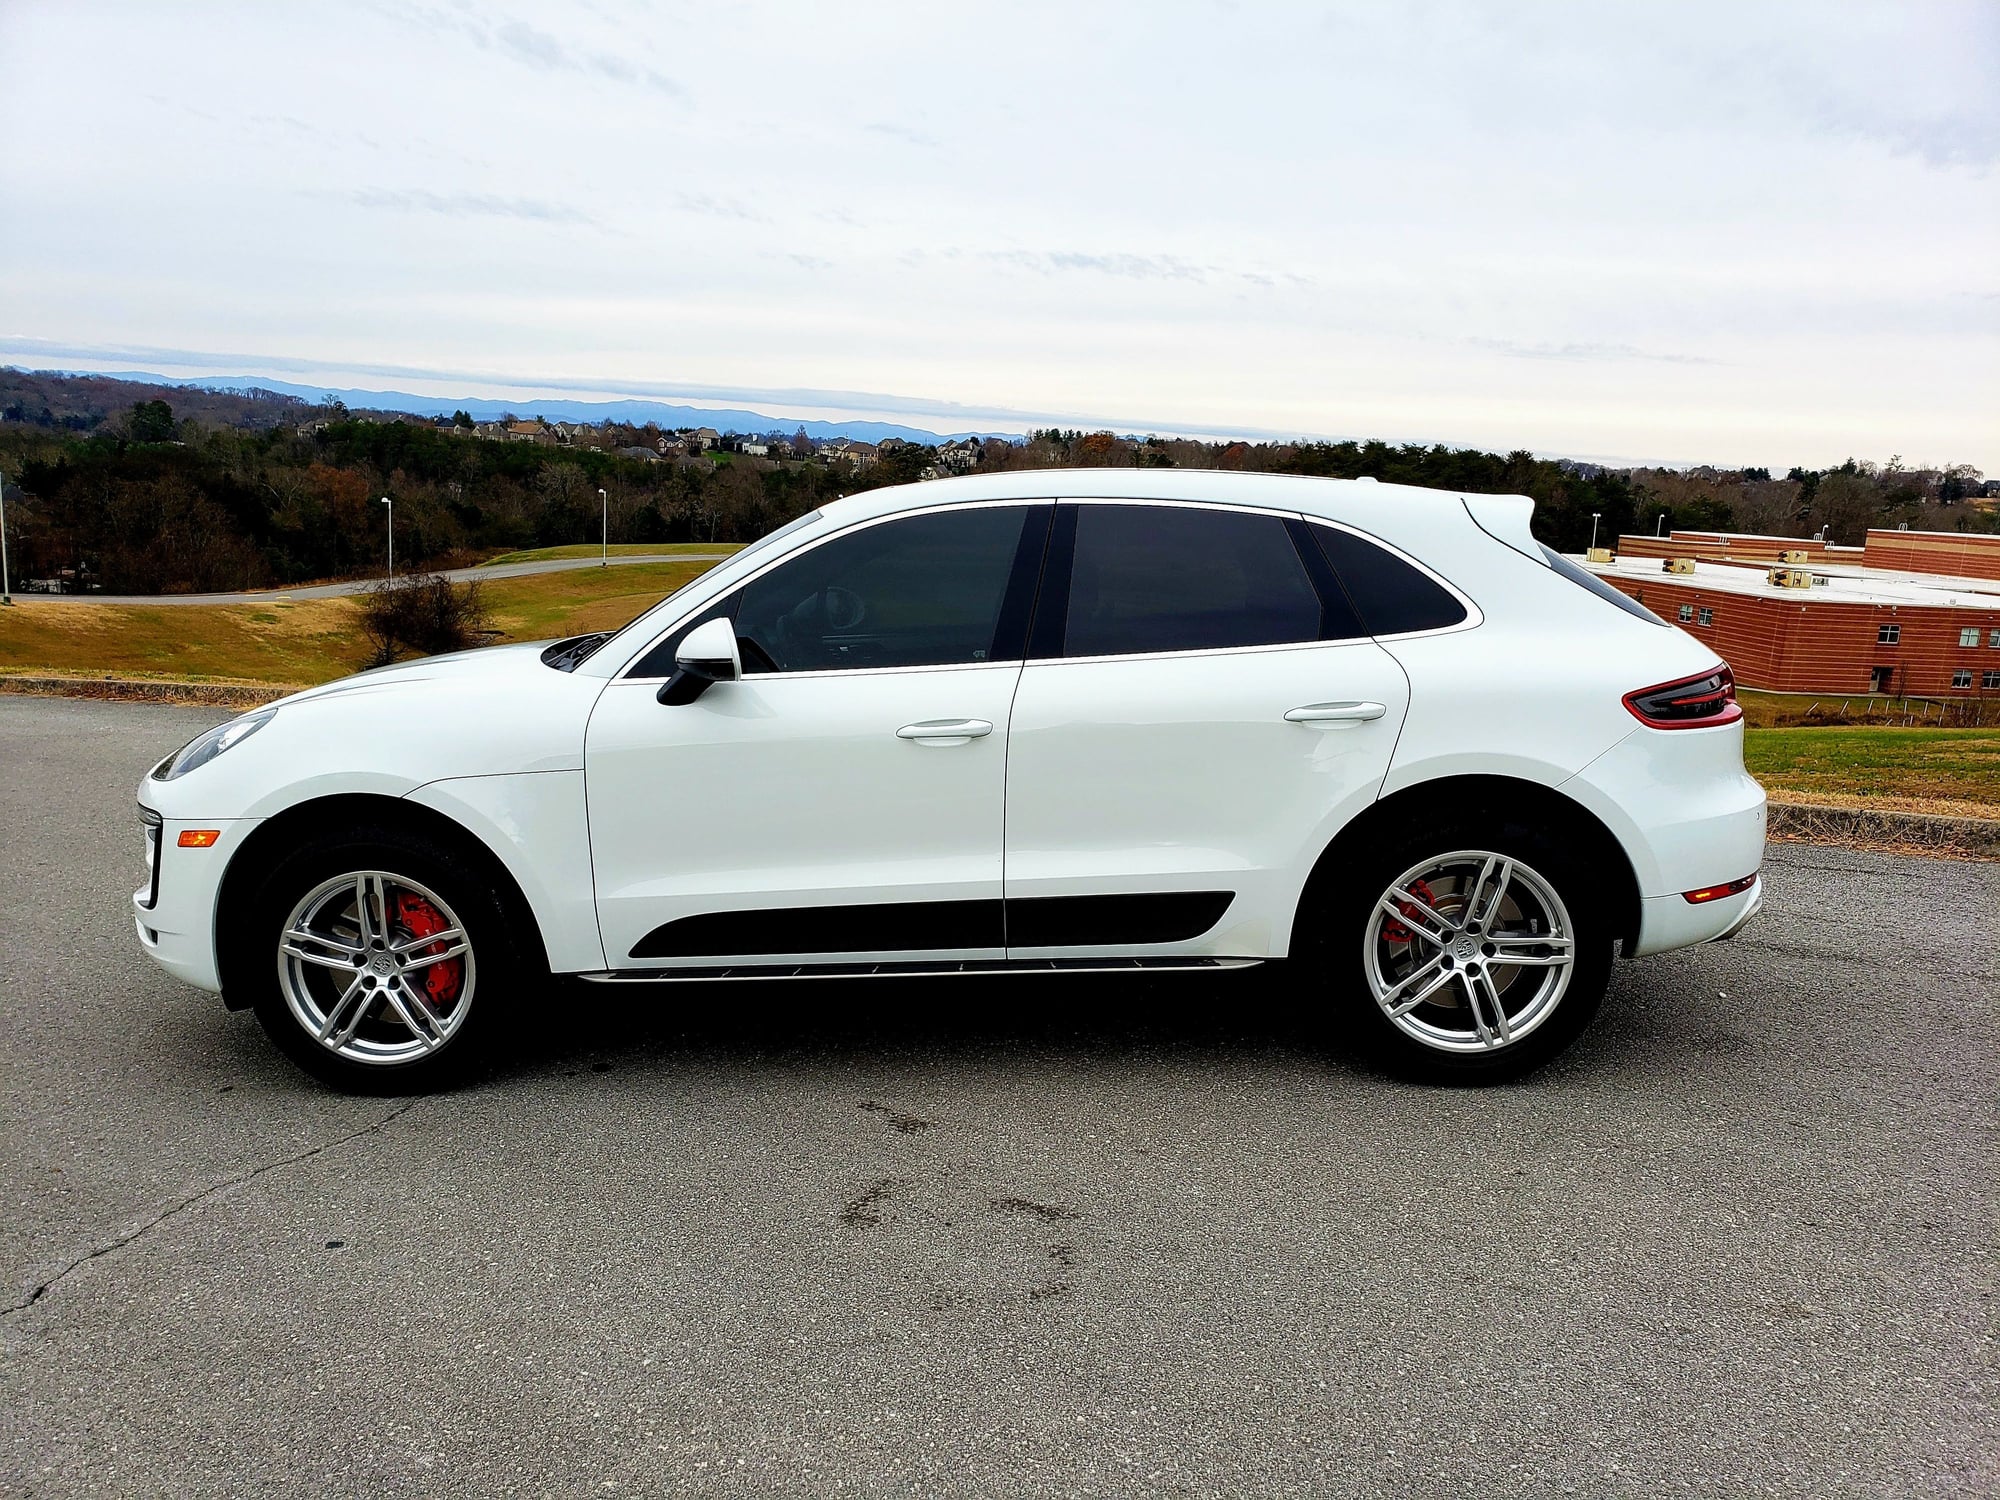 2016 Porsche Macan - 2016 Porsche Macan Turbo Excellent Condition- 1 owner car - Ceramic Coated - Warranty - Used - VIN WP1AF2A51GLB90763 - 38,500 Miles - 6 cyl - AWD - Automatic - SUV - White - Knoxville, TN 37922, United States